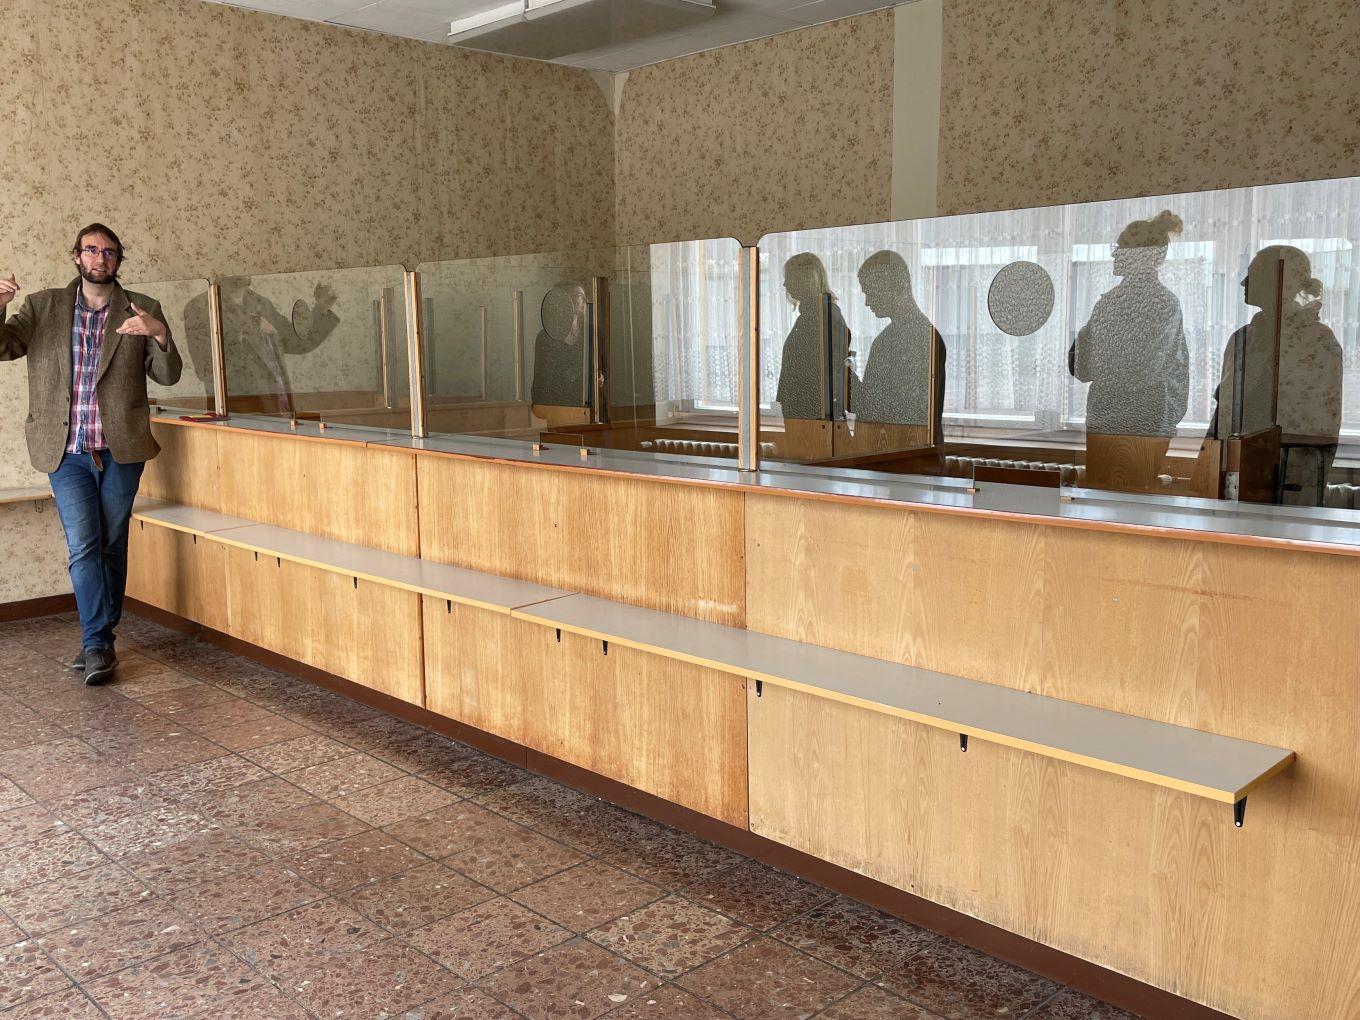 Inside the former currency exchange office of the GDR national bank.